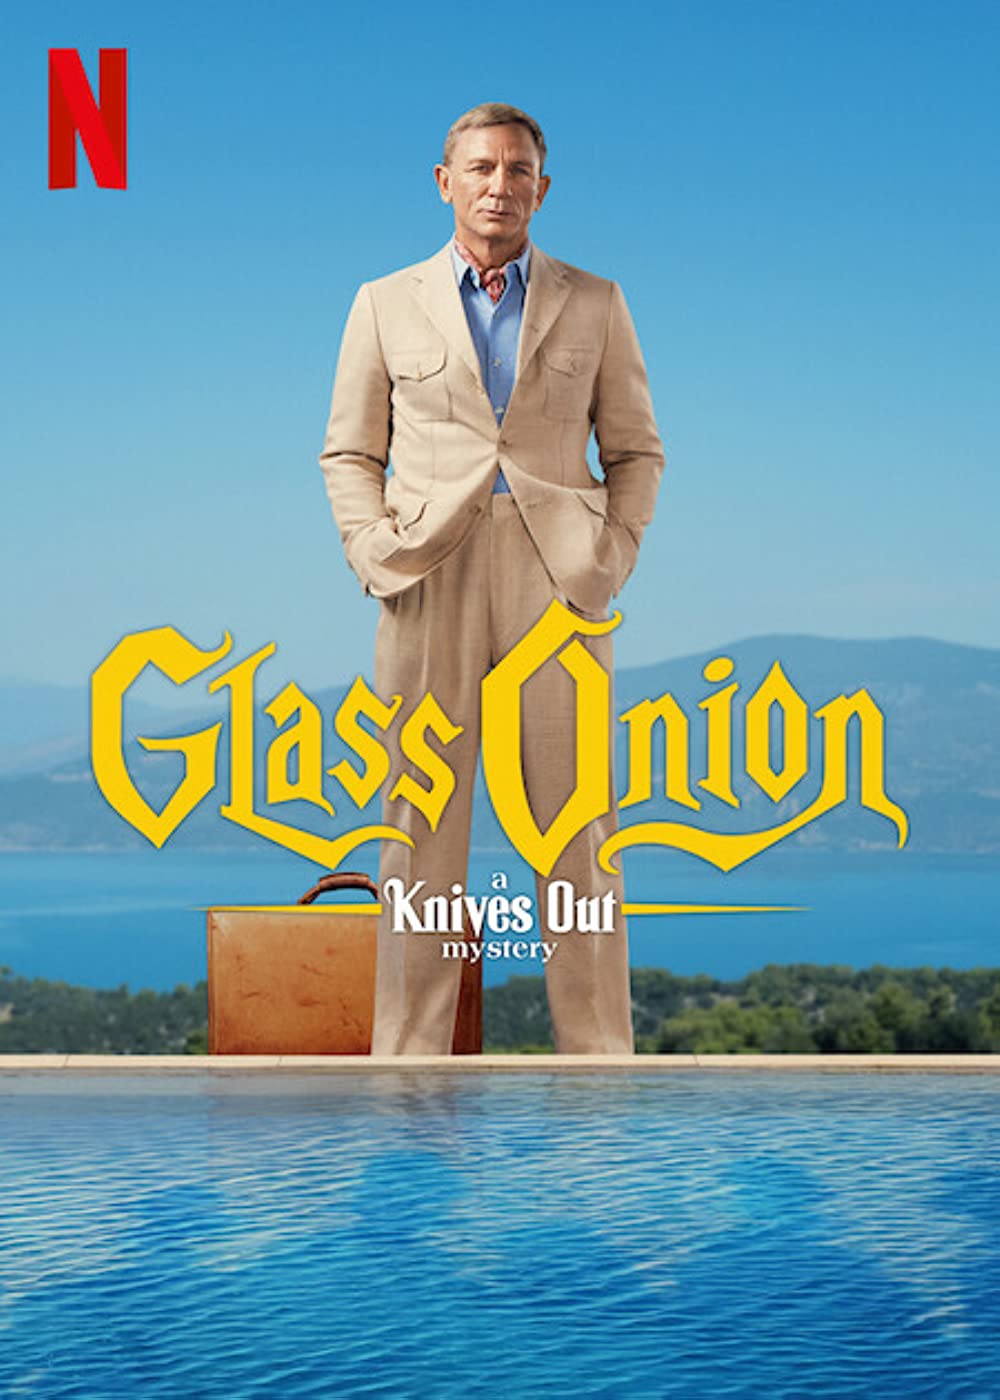 Stiahni si Filmy CZ/SK dabing Na noze: Glass Onion / Glass Onion: A Knives Out Mystery (2022)(FHD)(1080p)(WebDl)(HDR)(Hevc)(Atmos-5.1-CZ+Multilang)(MultiSub) = CSFD 70%